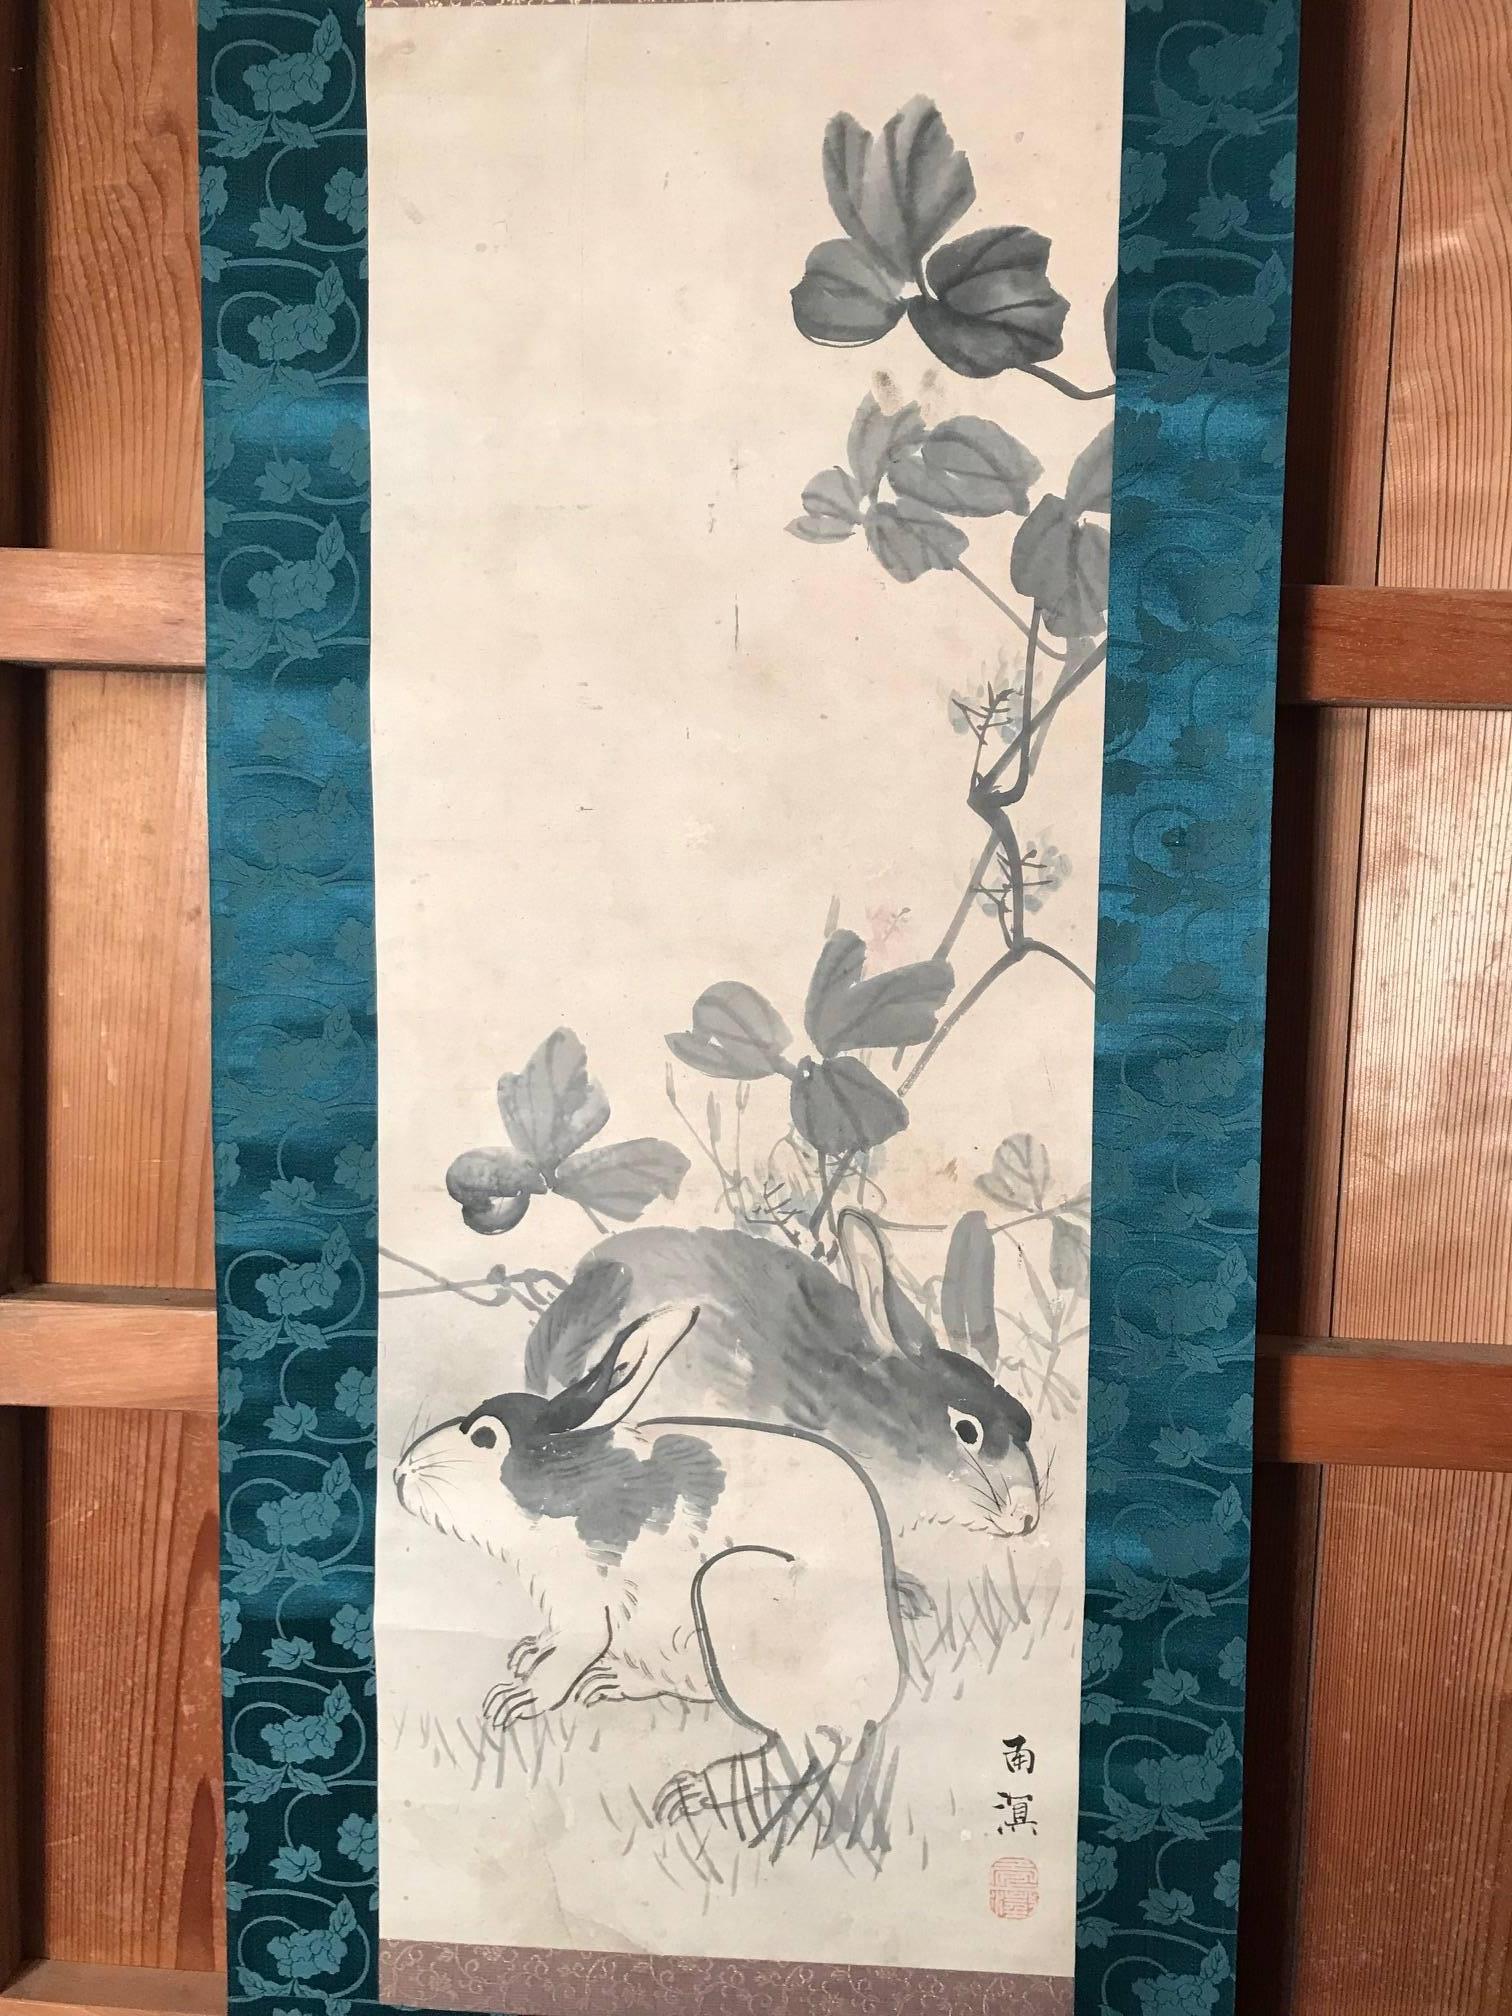 Japan Big Pair Rabbits Old Hand-Painted Scroll, Signed 1